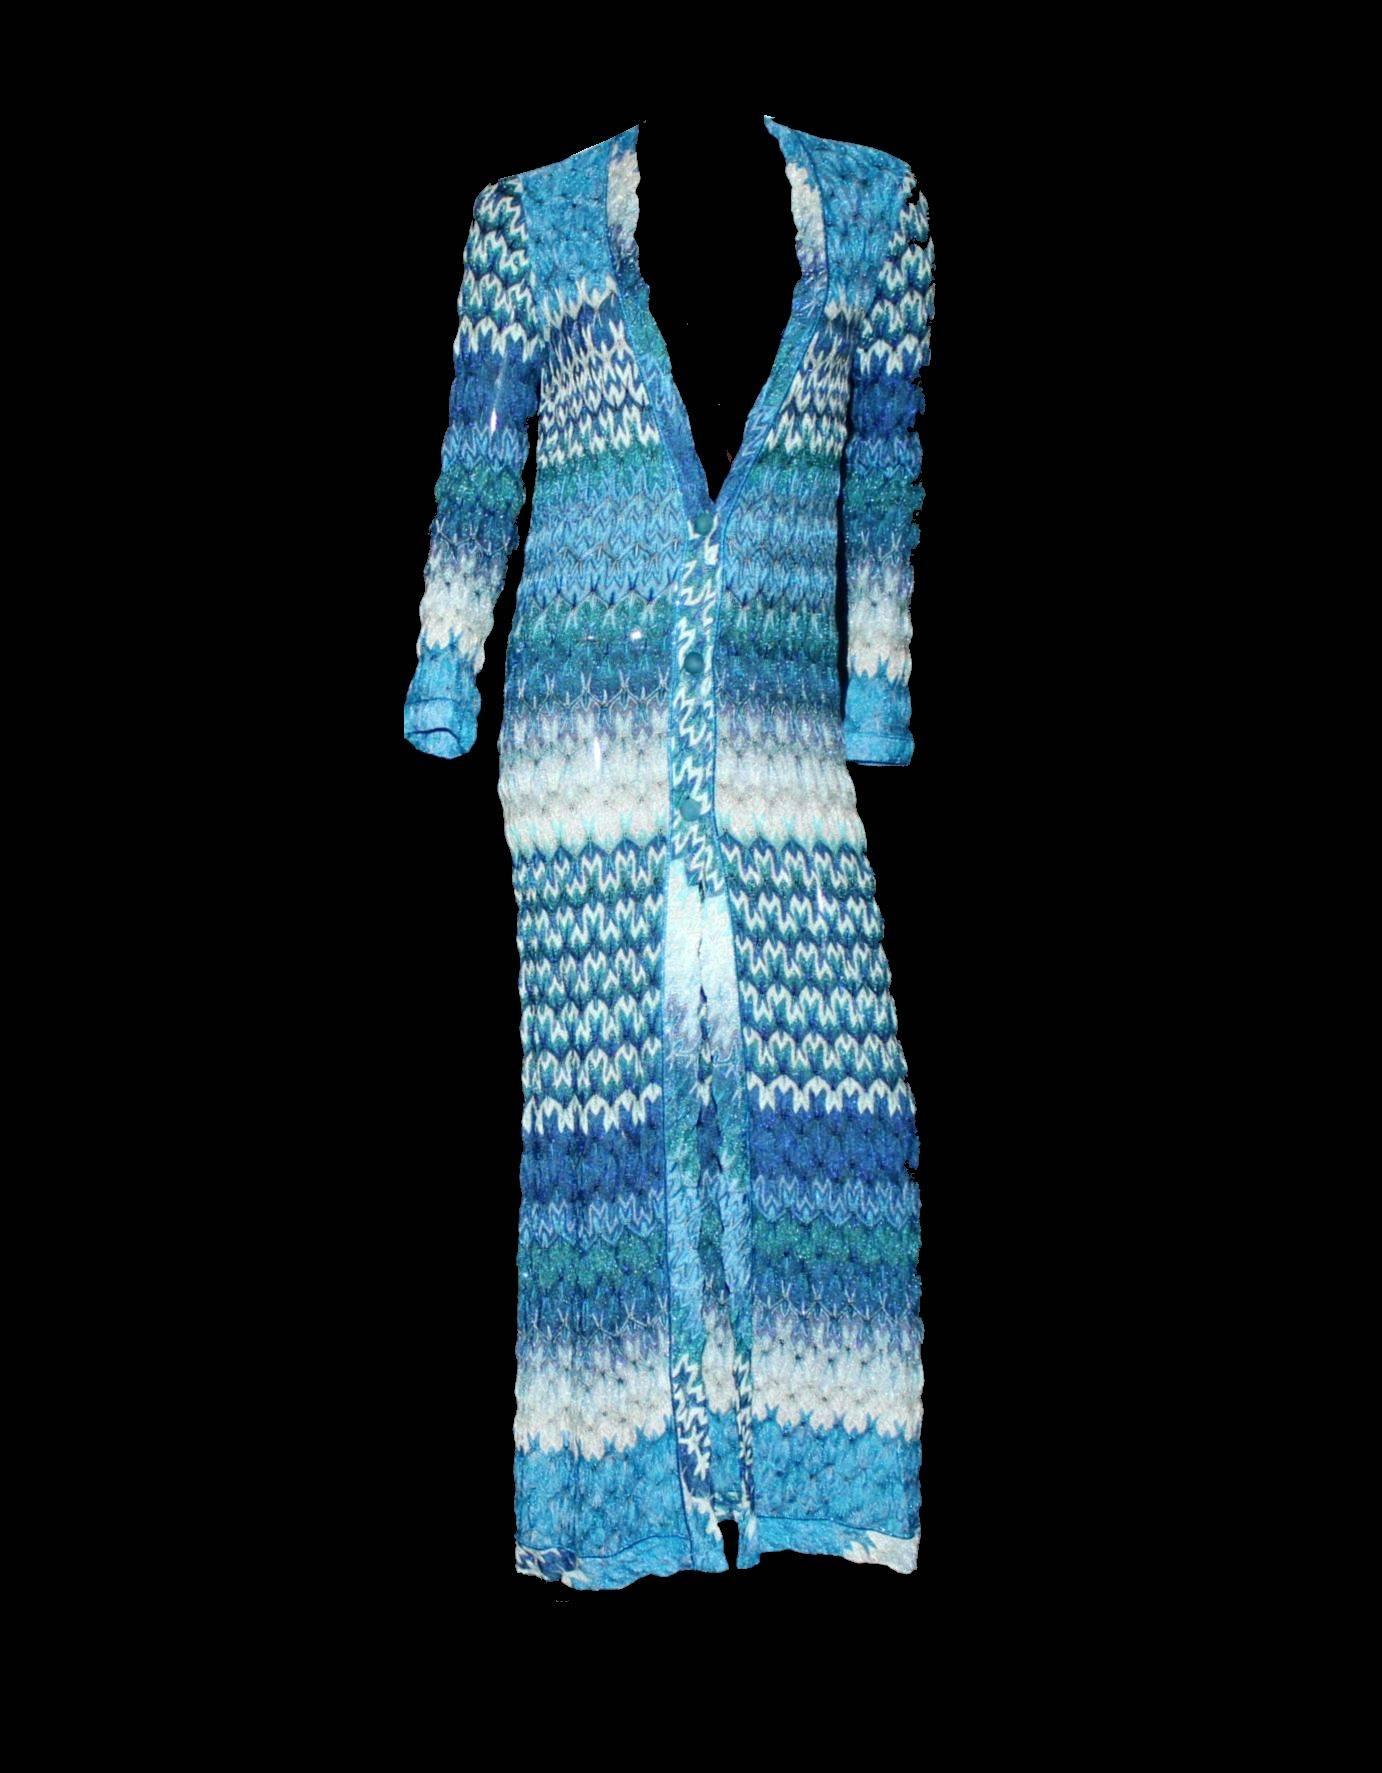 LUXURIOUS

 MISSONI SEAFOAM LUREX EVENING GOWN

A stunning maxi dress by MISSONI - impossible to find!
Orange Label - Missoni's exclusivest main collection
Such a versatile piece - wear it as dress, coat or shrug
Closes with buttons in front
Full